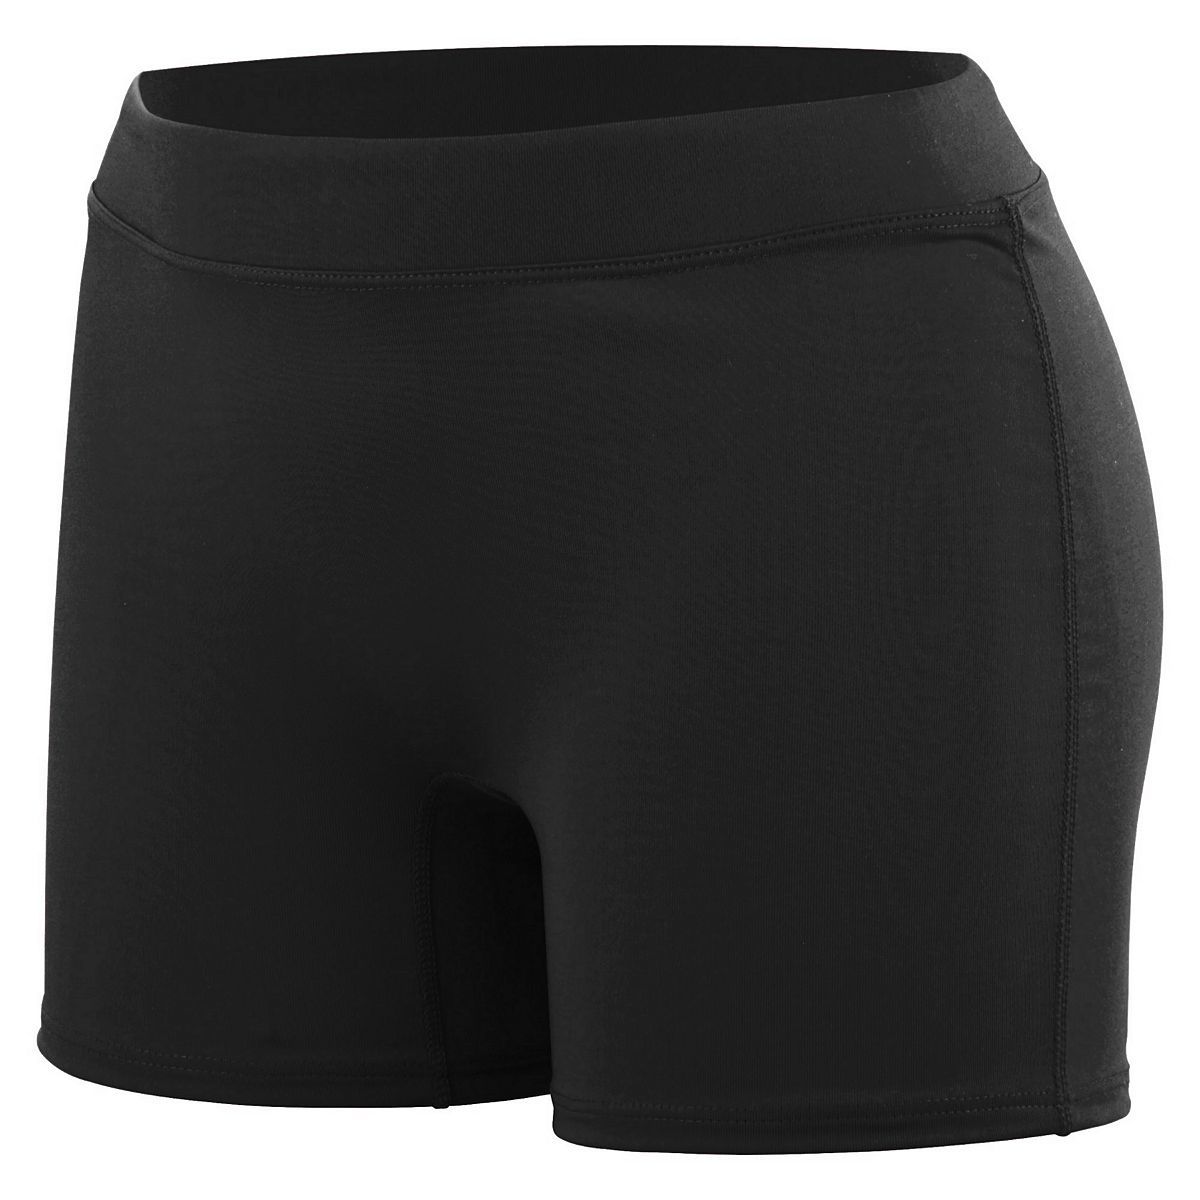 High 5 Girls Knock Out Shorts